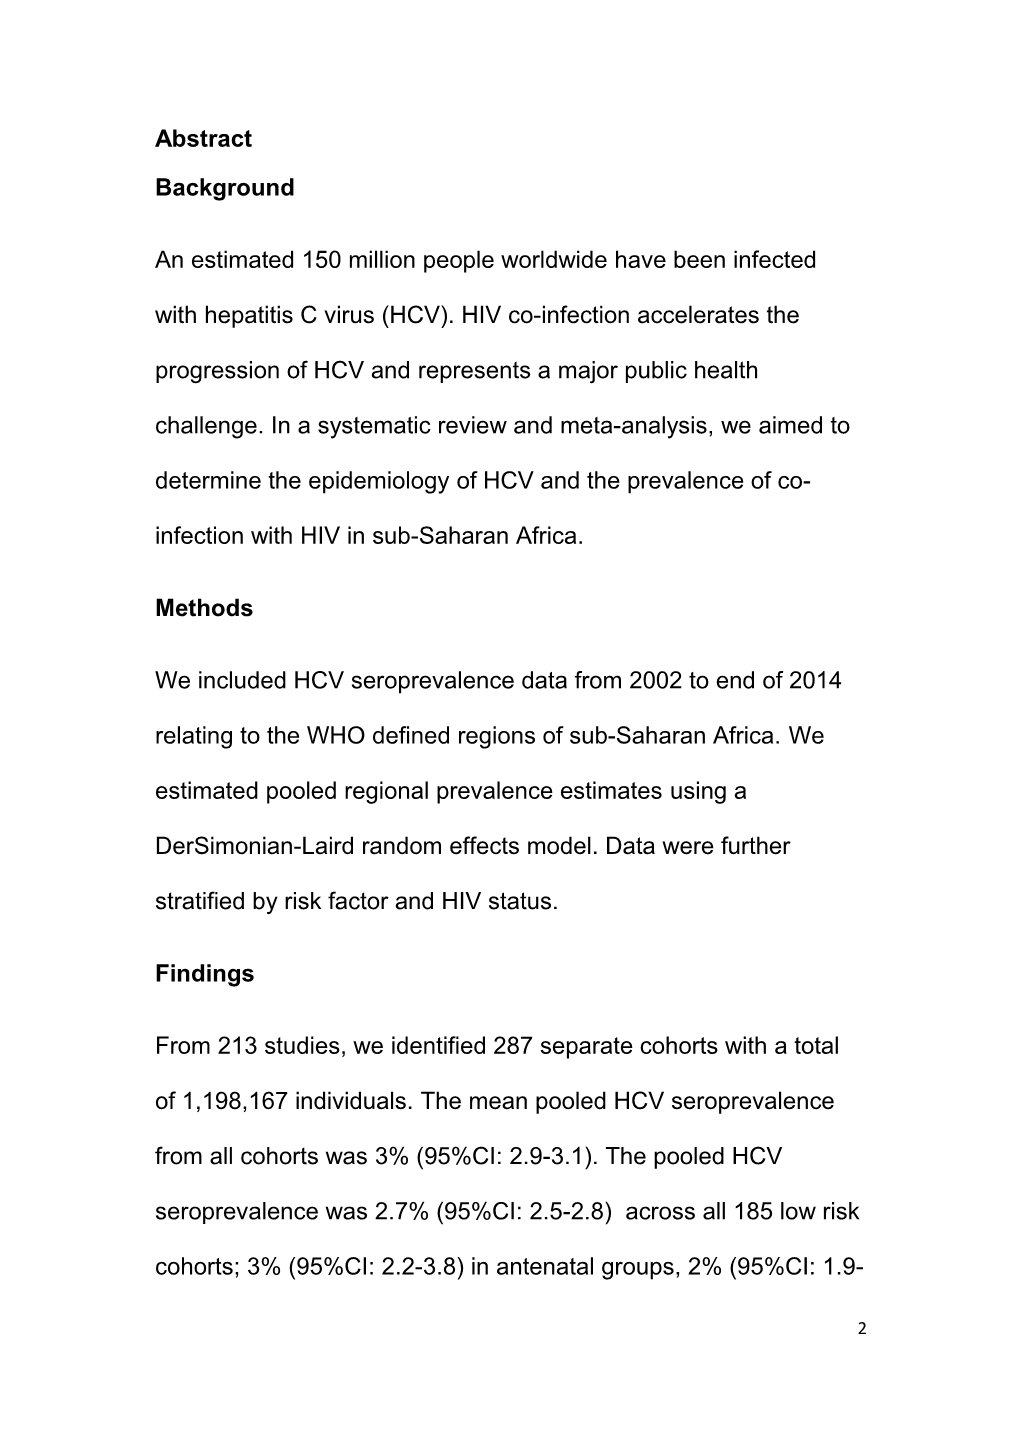 HCV in Sub-Saharan Africa: a Systematic Review